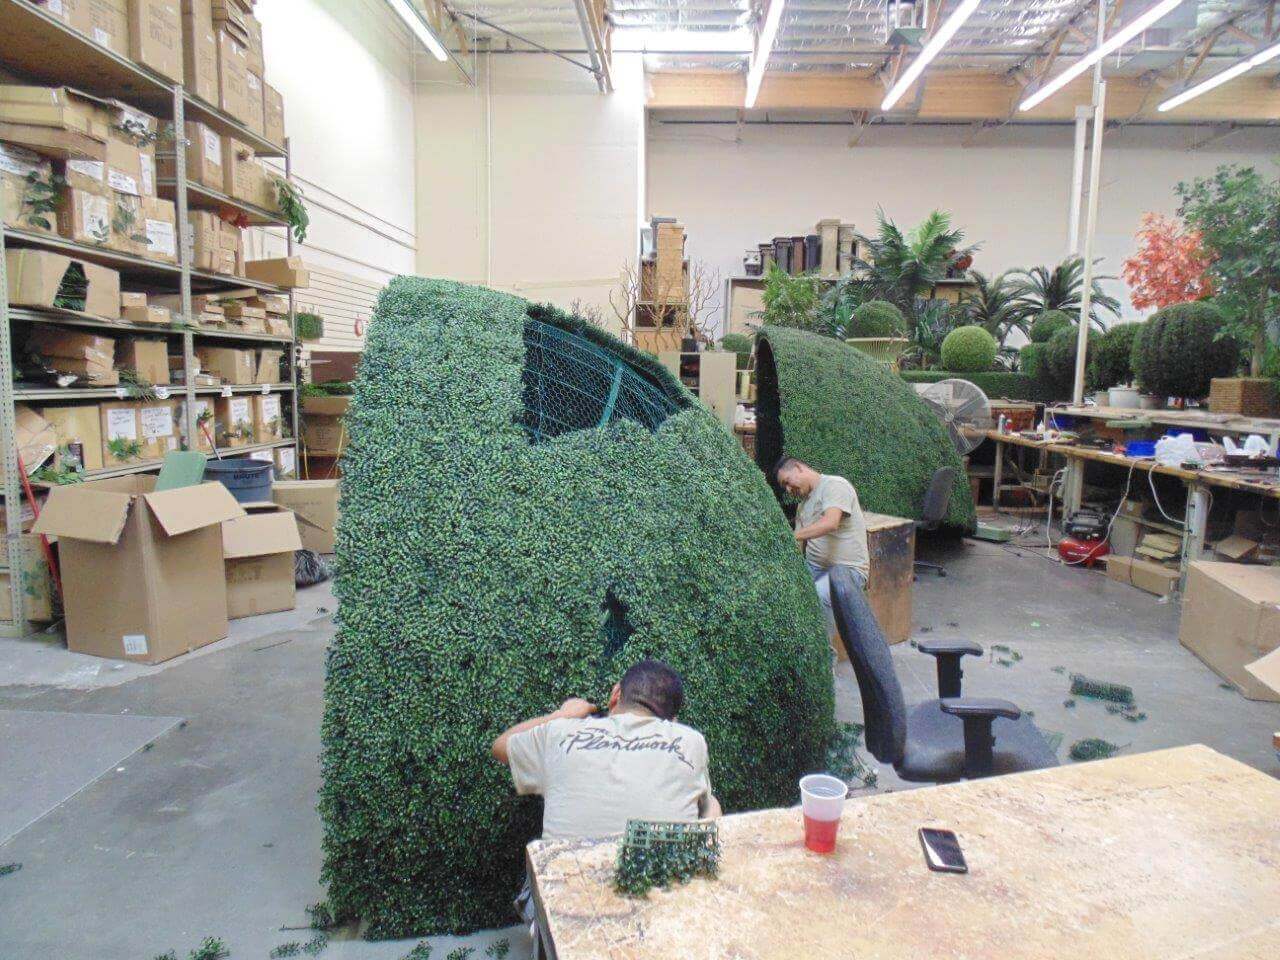 The 15-foot diameter canopy of the Boxwood topiary tree for Aria Resort & Casino under construction 3